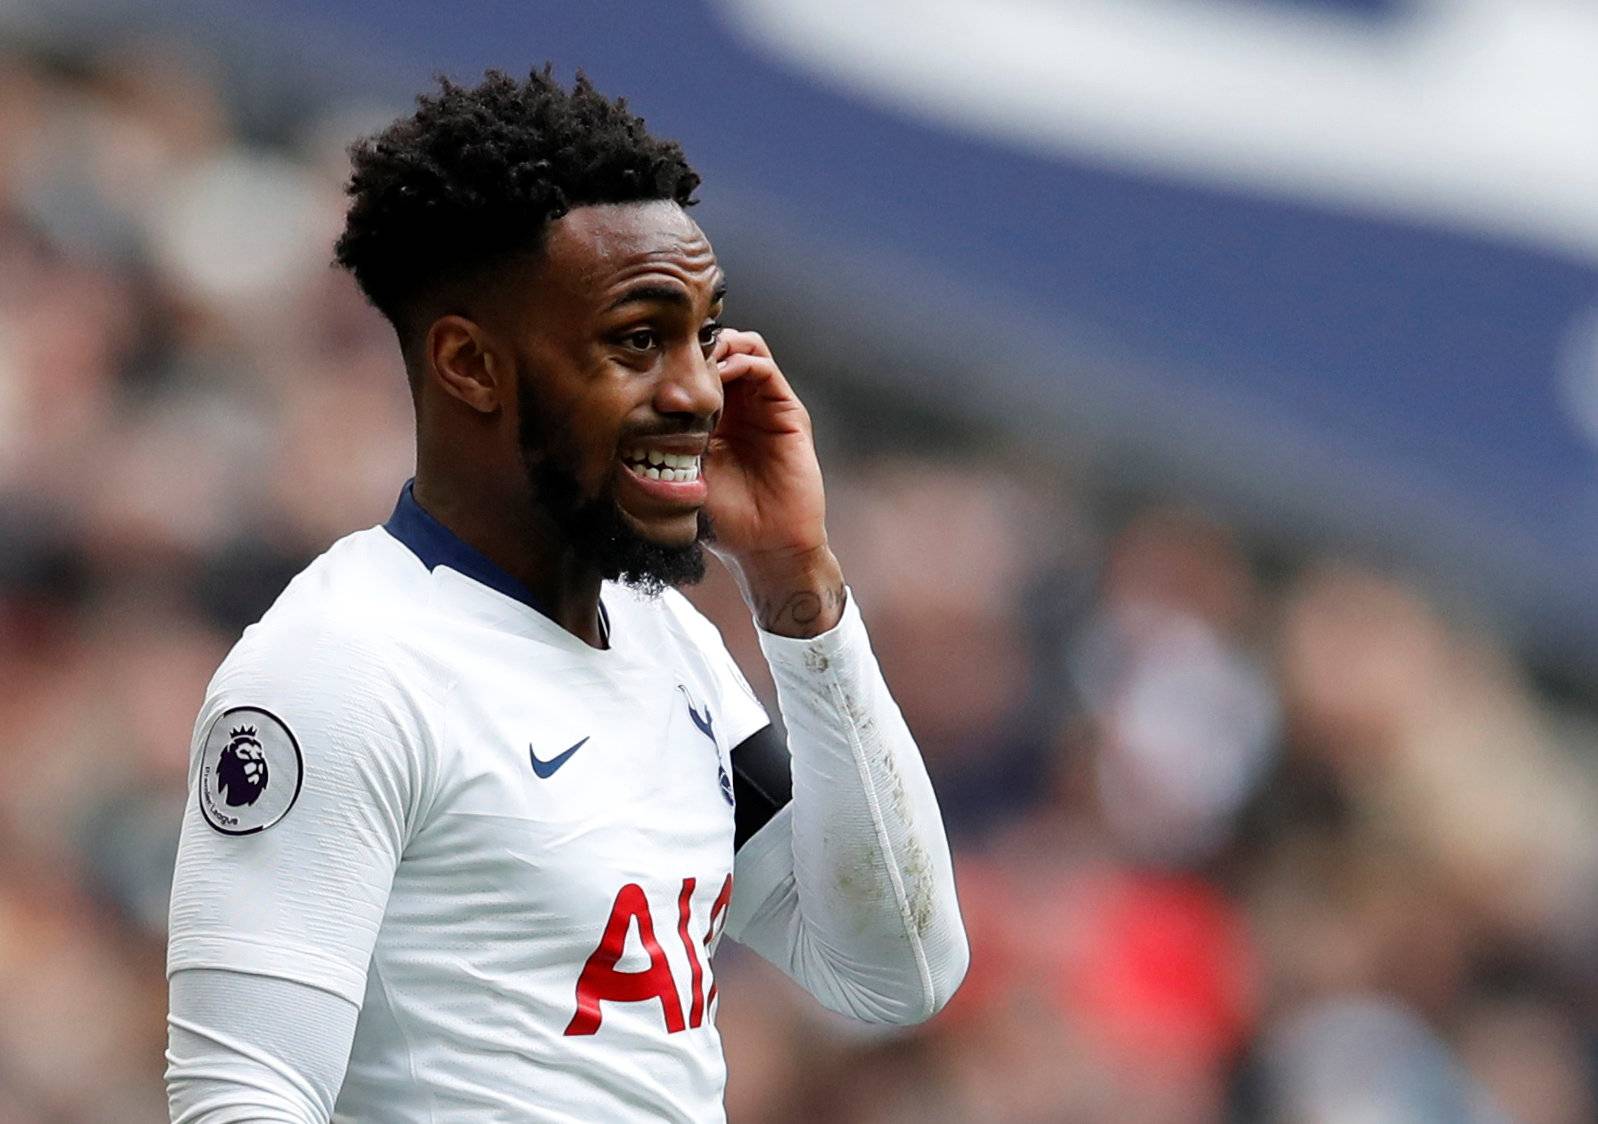 Danny Rose's stock is dropping but it's not bad news for Tottenham fans - Opinion